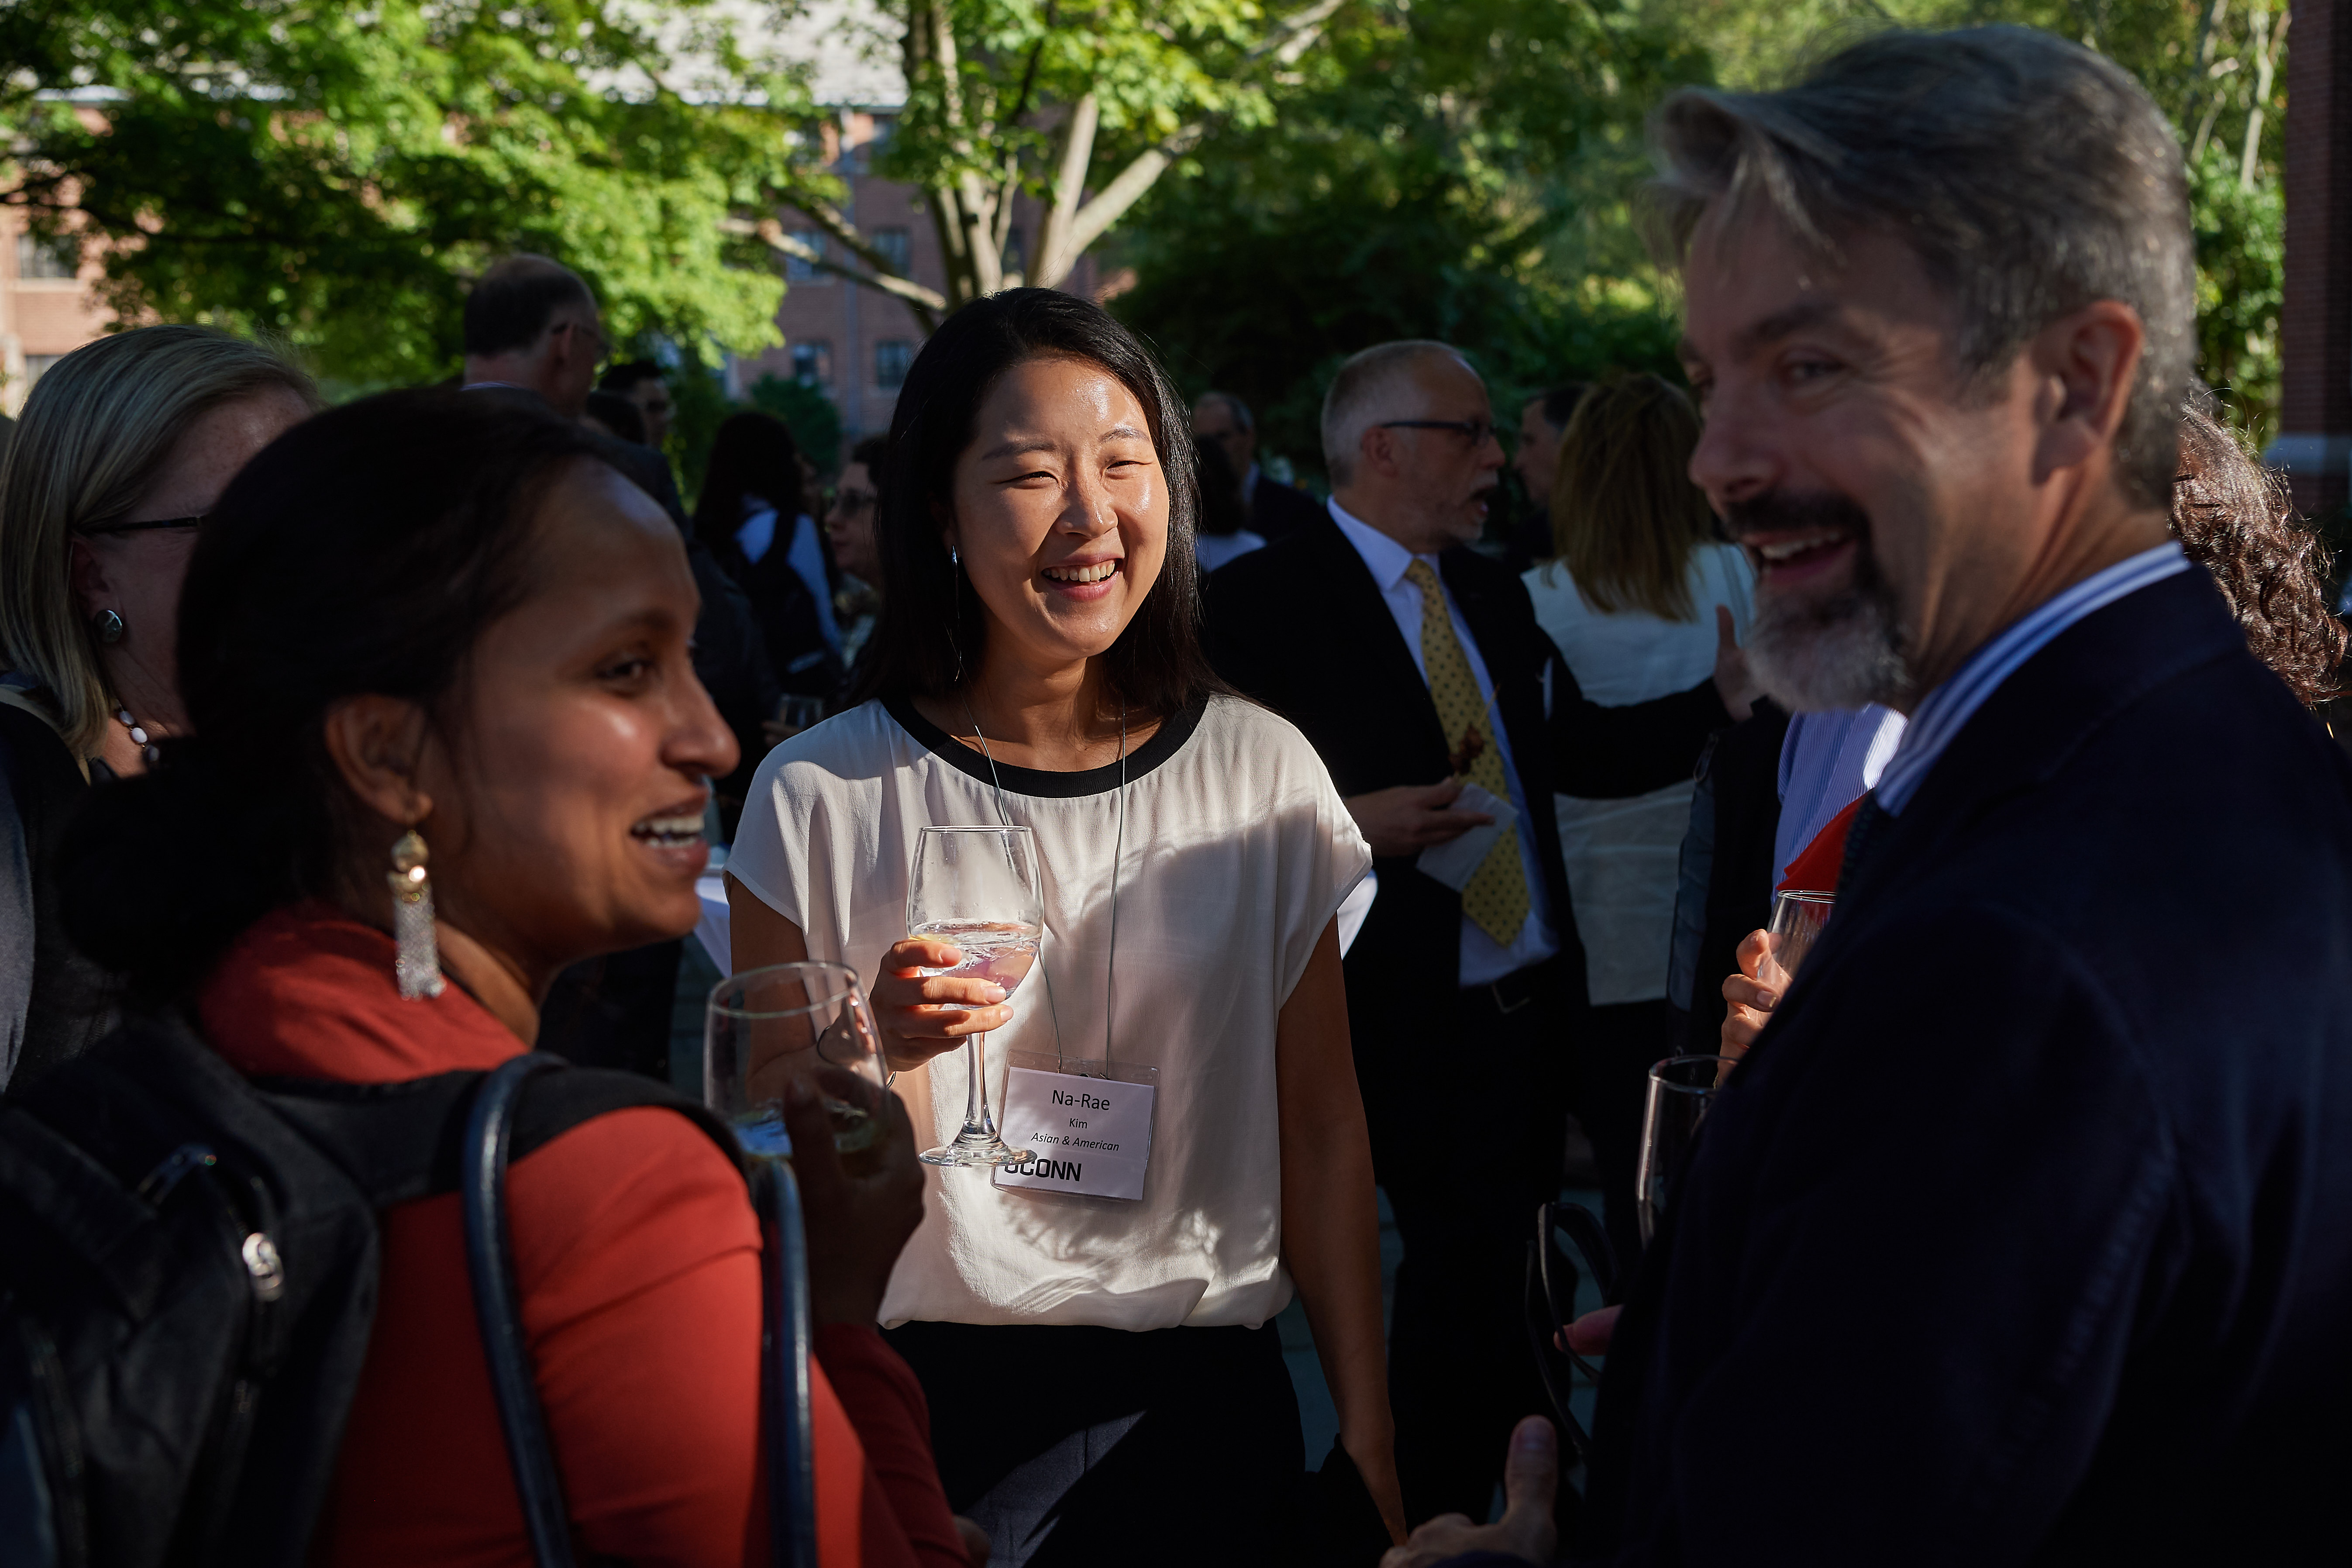 Na-Ree Kim, center, assistant professor in residence of Asian and Asian-American studies, Rupal Parekh, left, assistant professor of social work,and John Volin, vice provost for academic affairs speak at a reception following new faculty orientation on the patio of the William Benton Museum of Art. (Peter Morenus/UConn Photo)